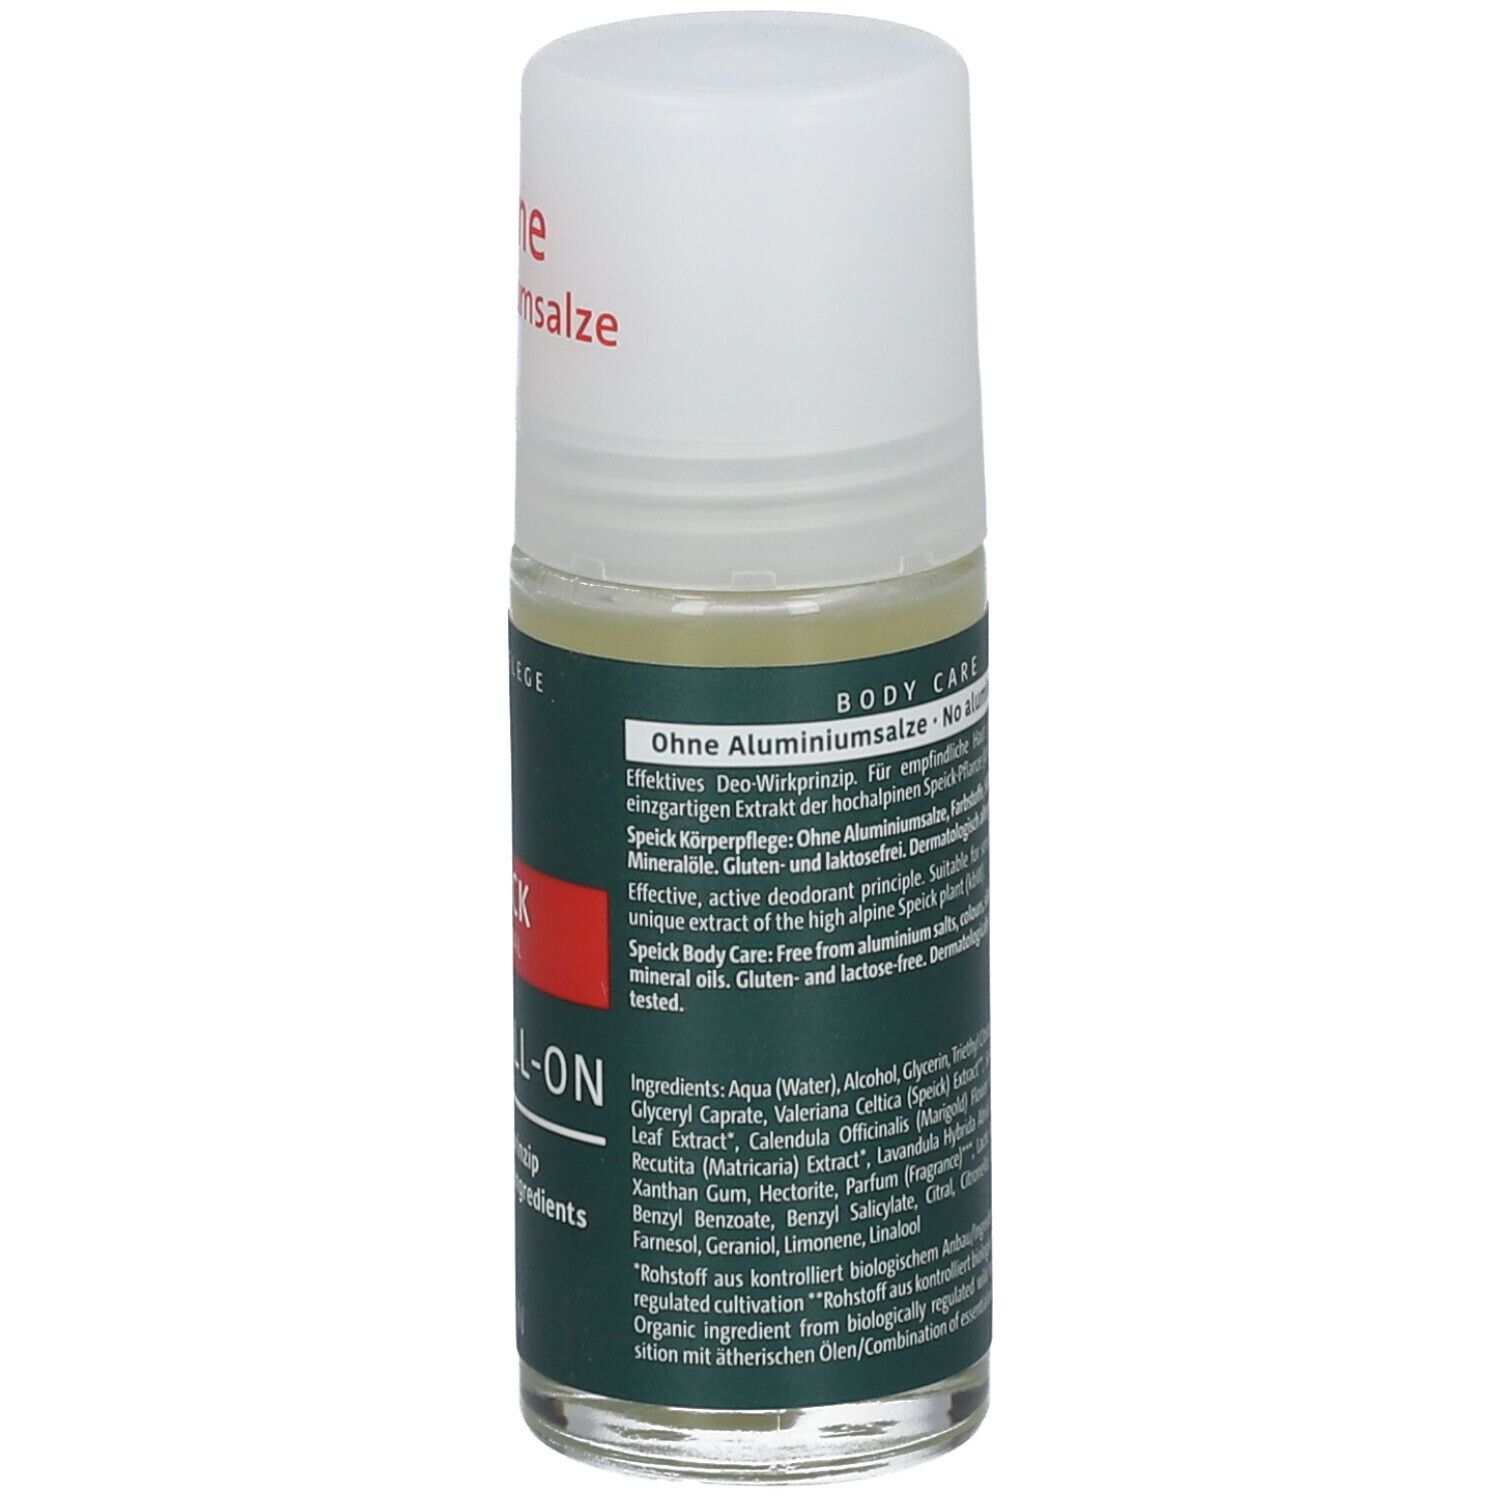 SPEICK Natural Deo Roll-on